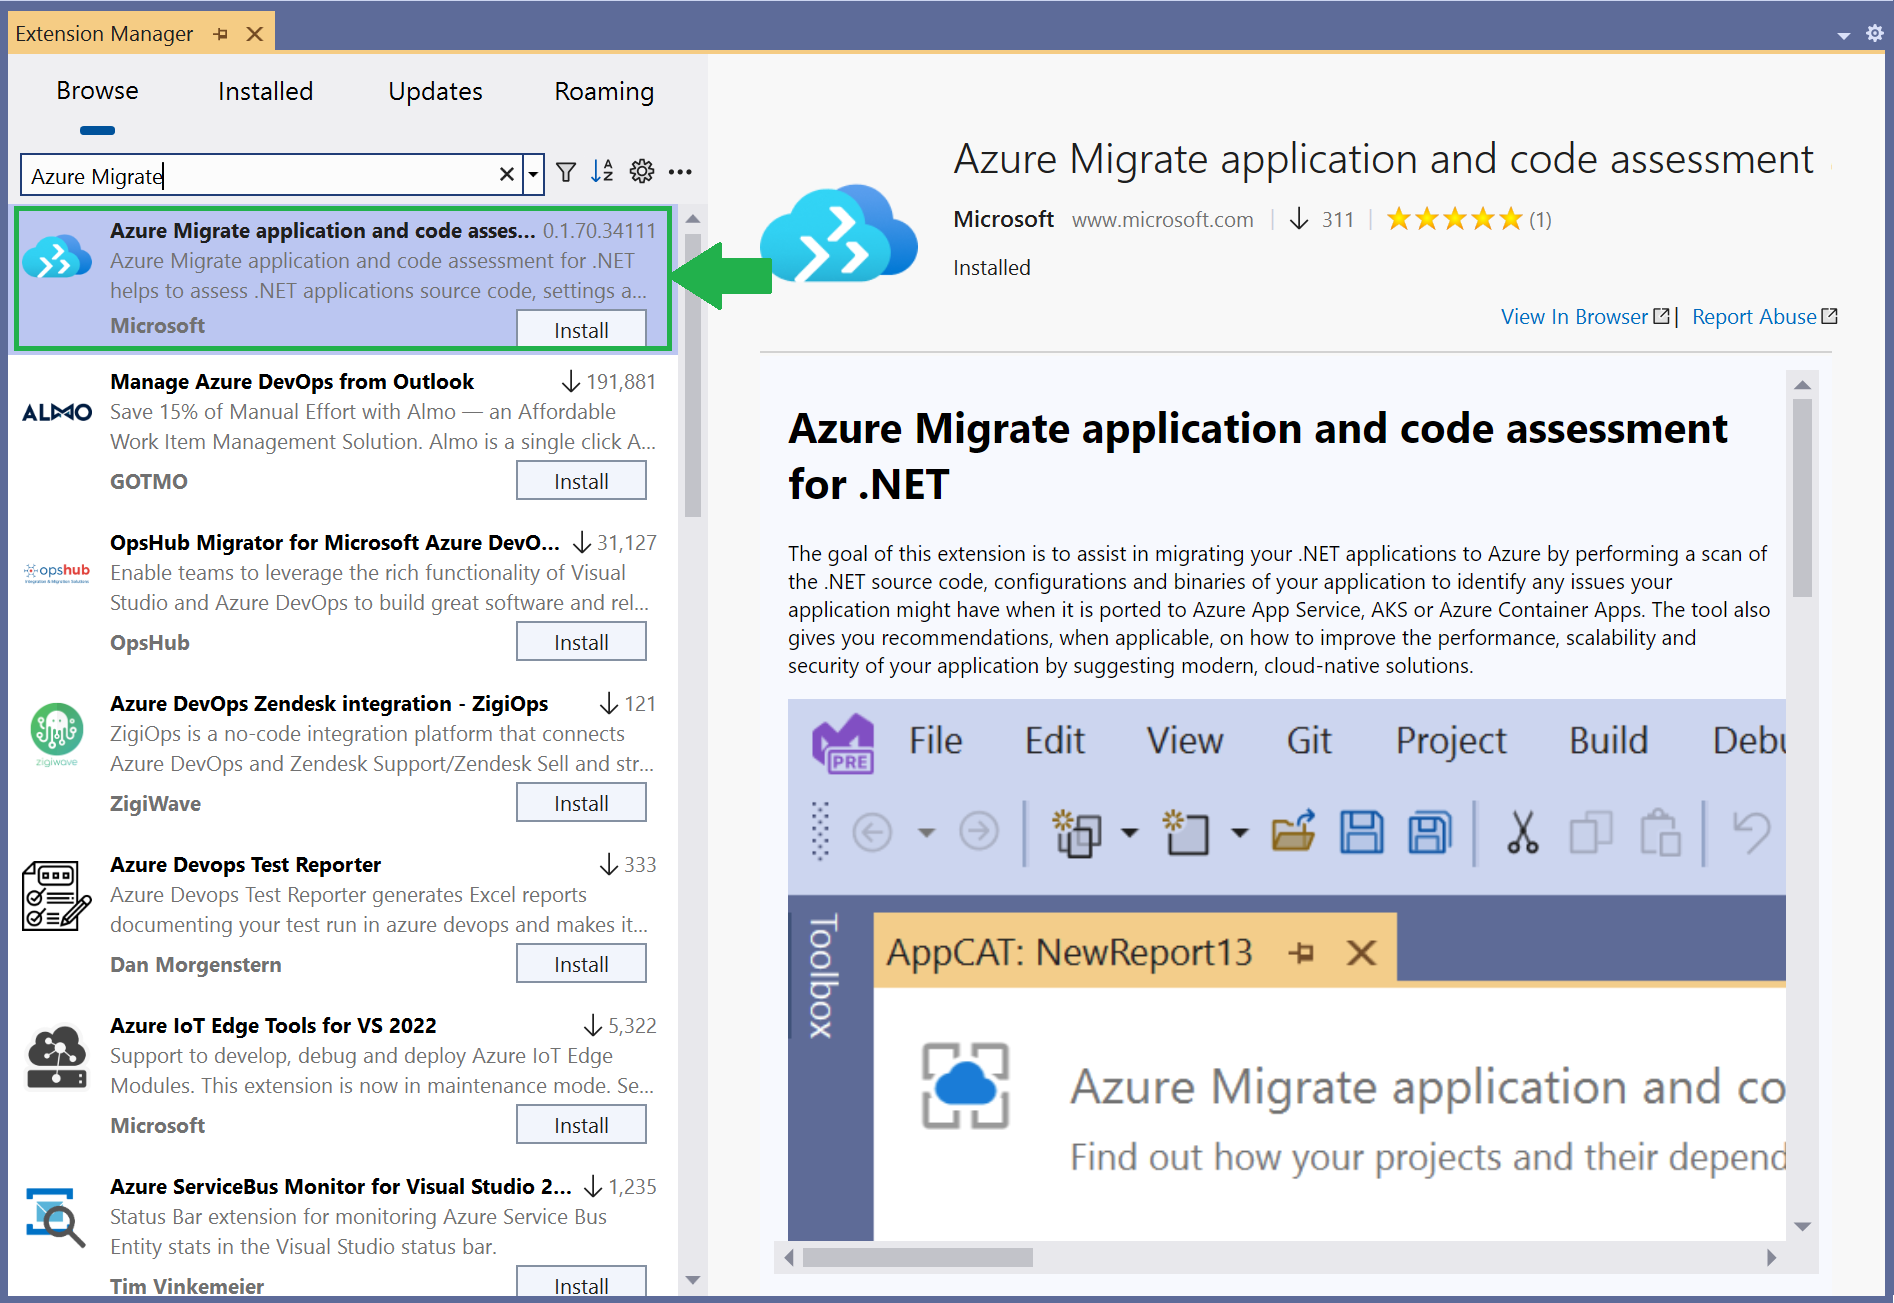 Screenshot of the Azure Migrate application and code assessment for .NET vsix